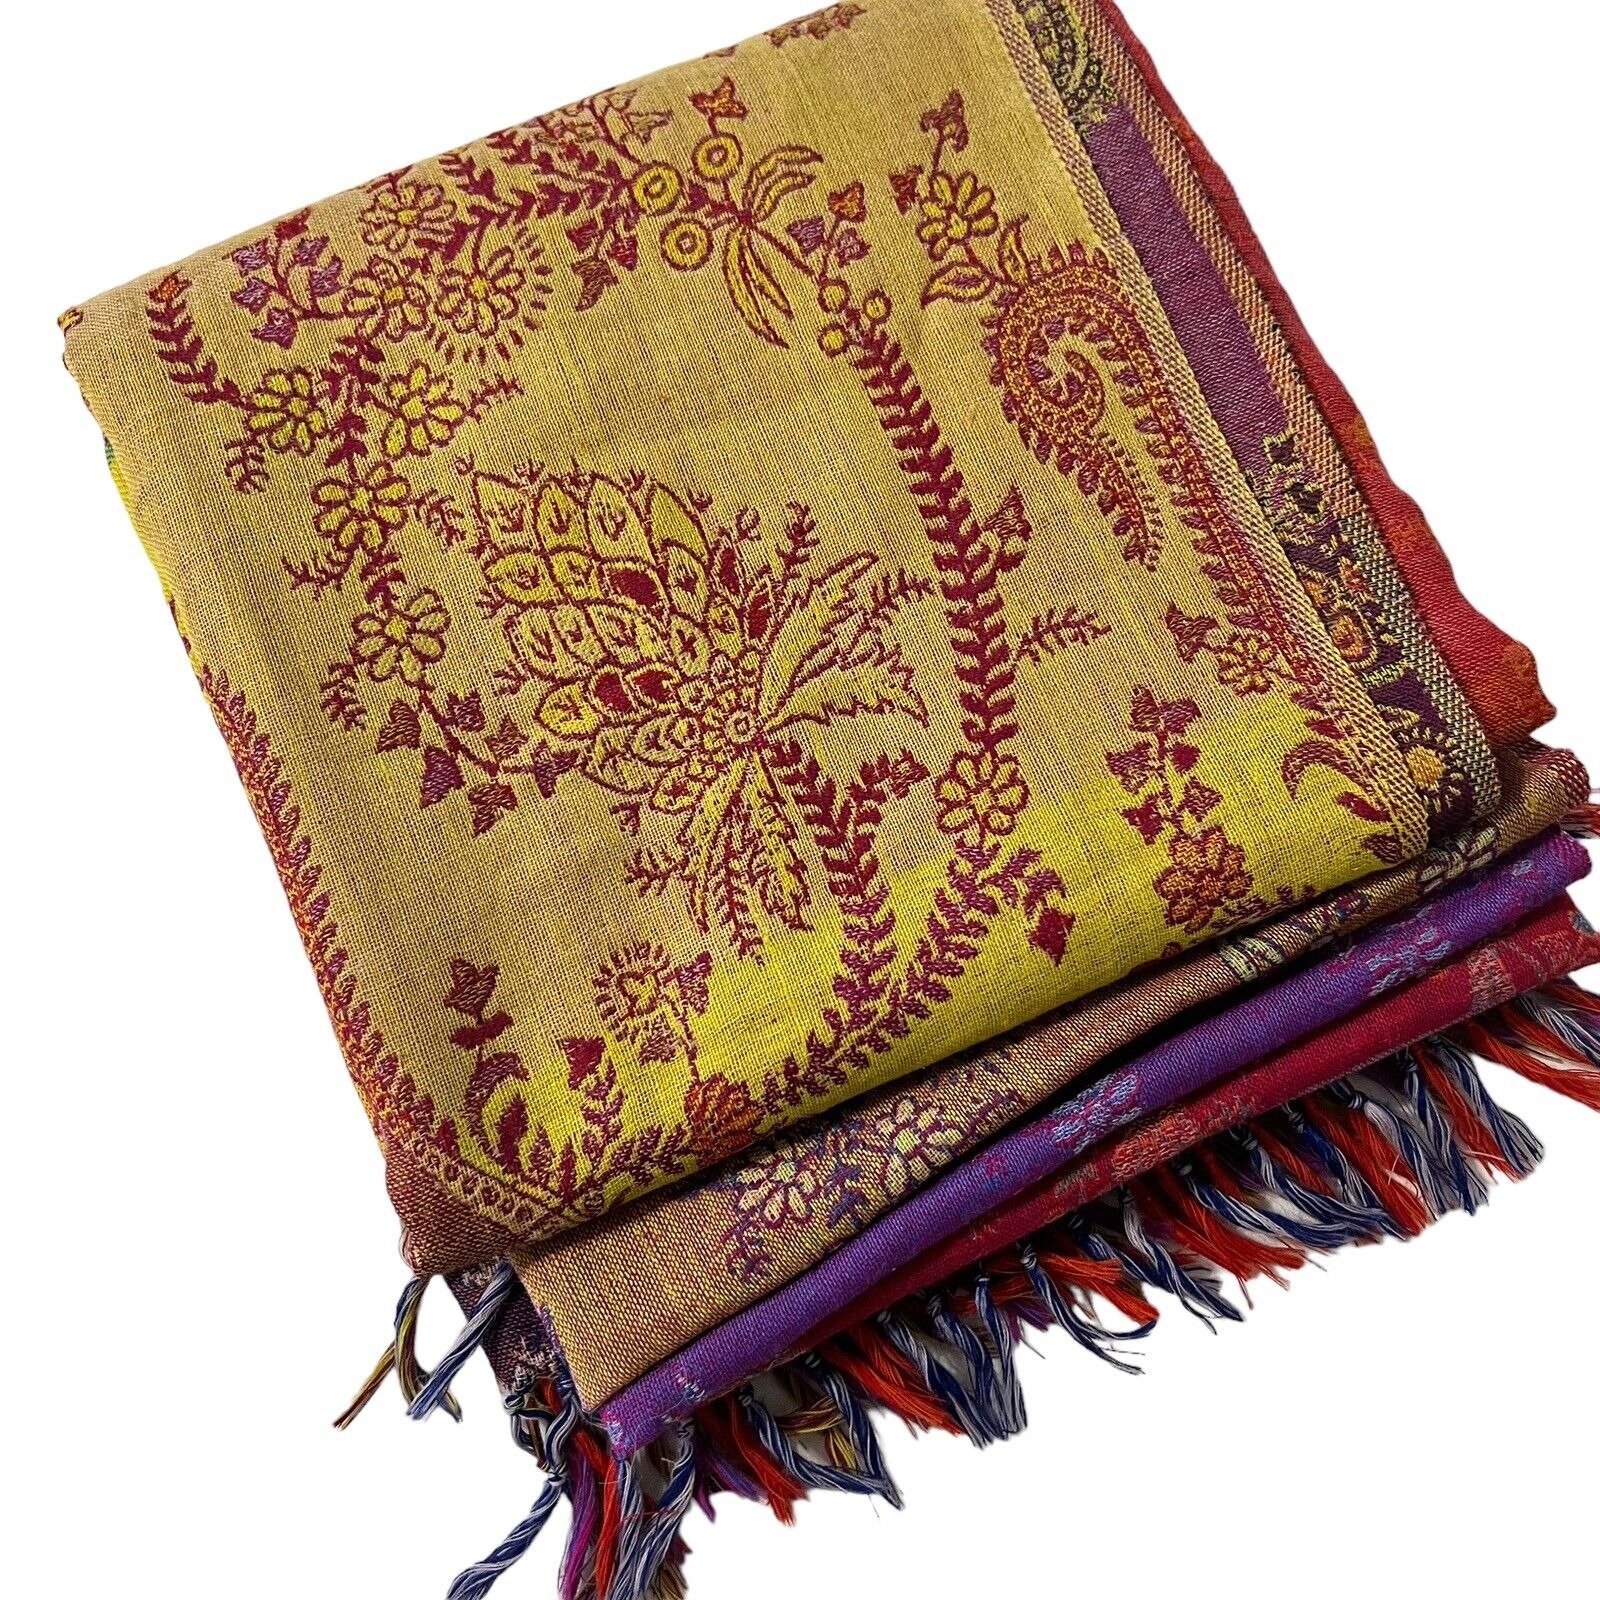 Kashmir Paisley Hand Woven Tablecloth Shawl Made In India